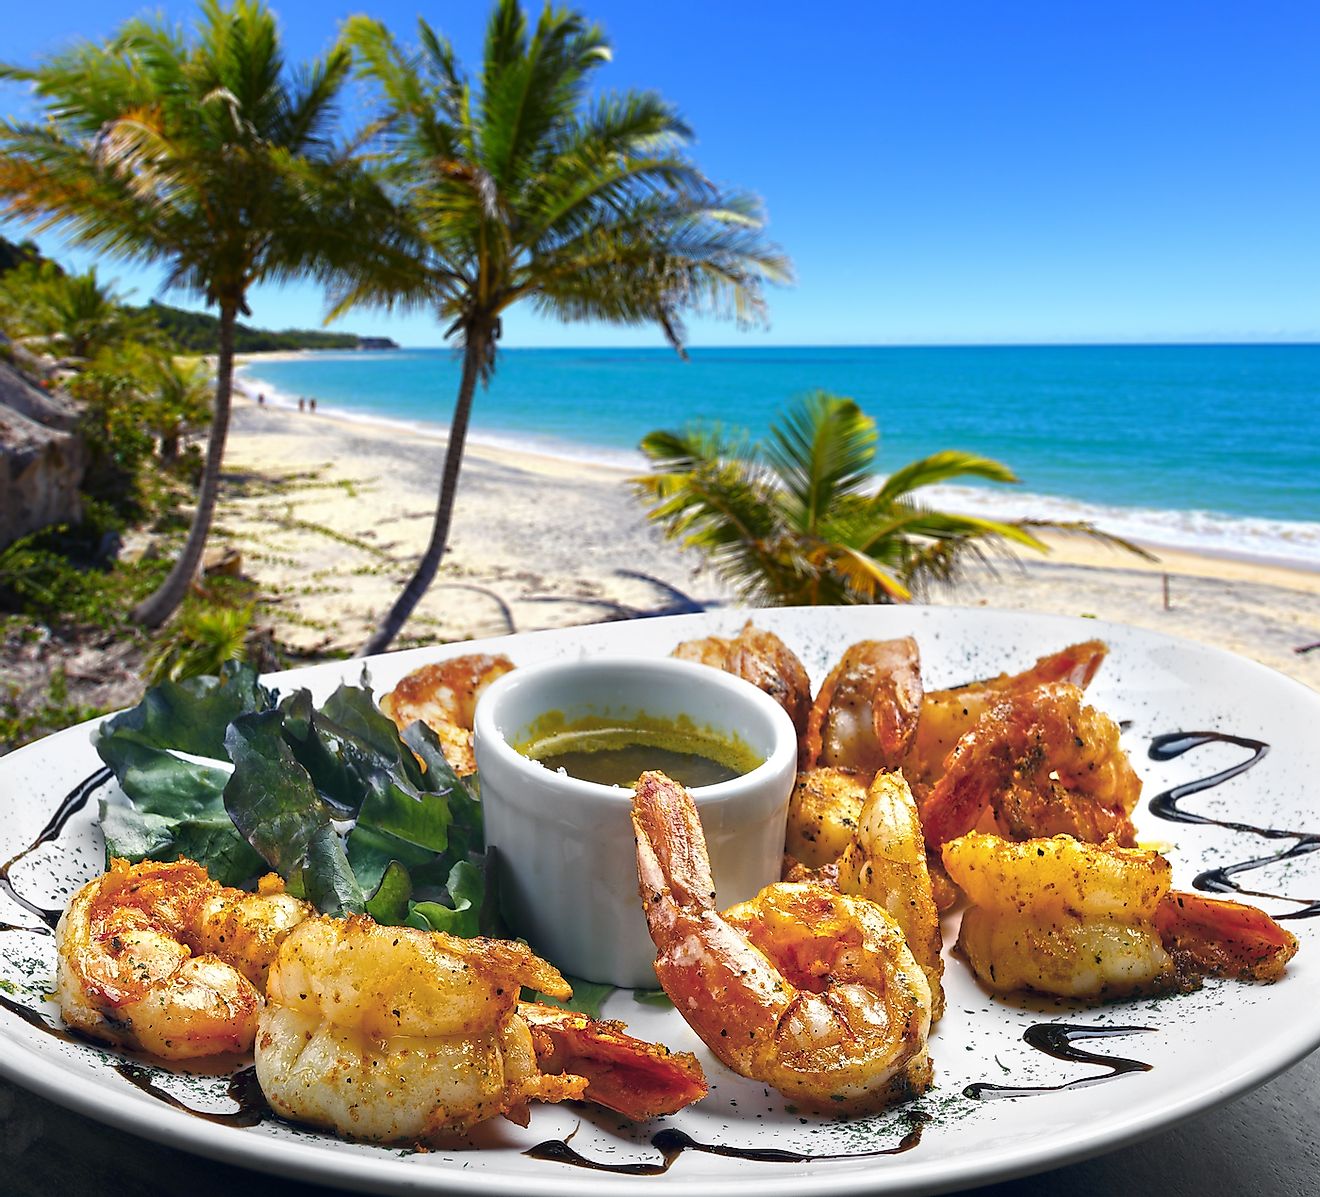 Island nations are know for their delicious seafood platters. Image credit: Rocharibeiro/Shutterstock.com